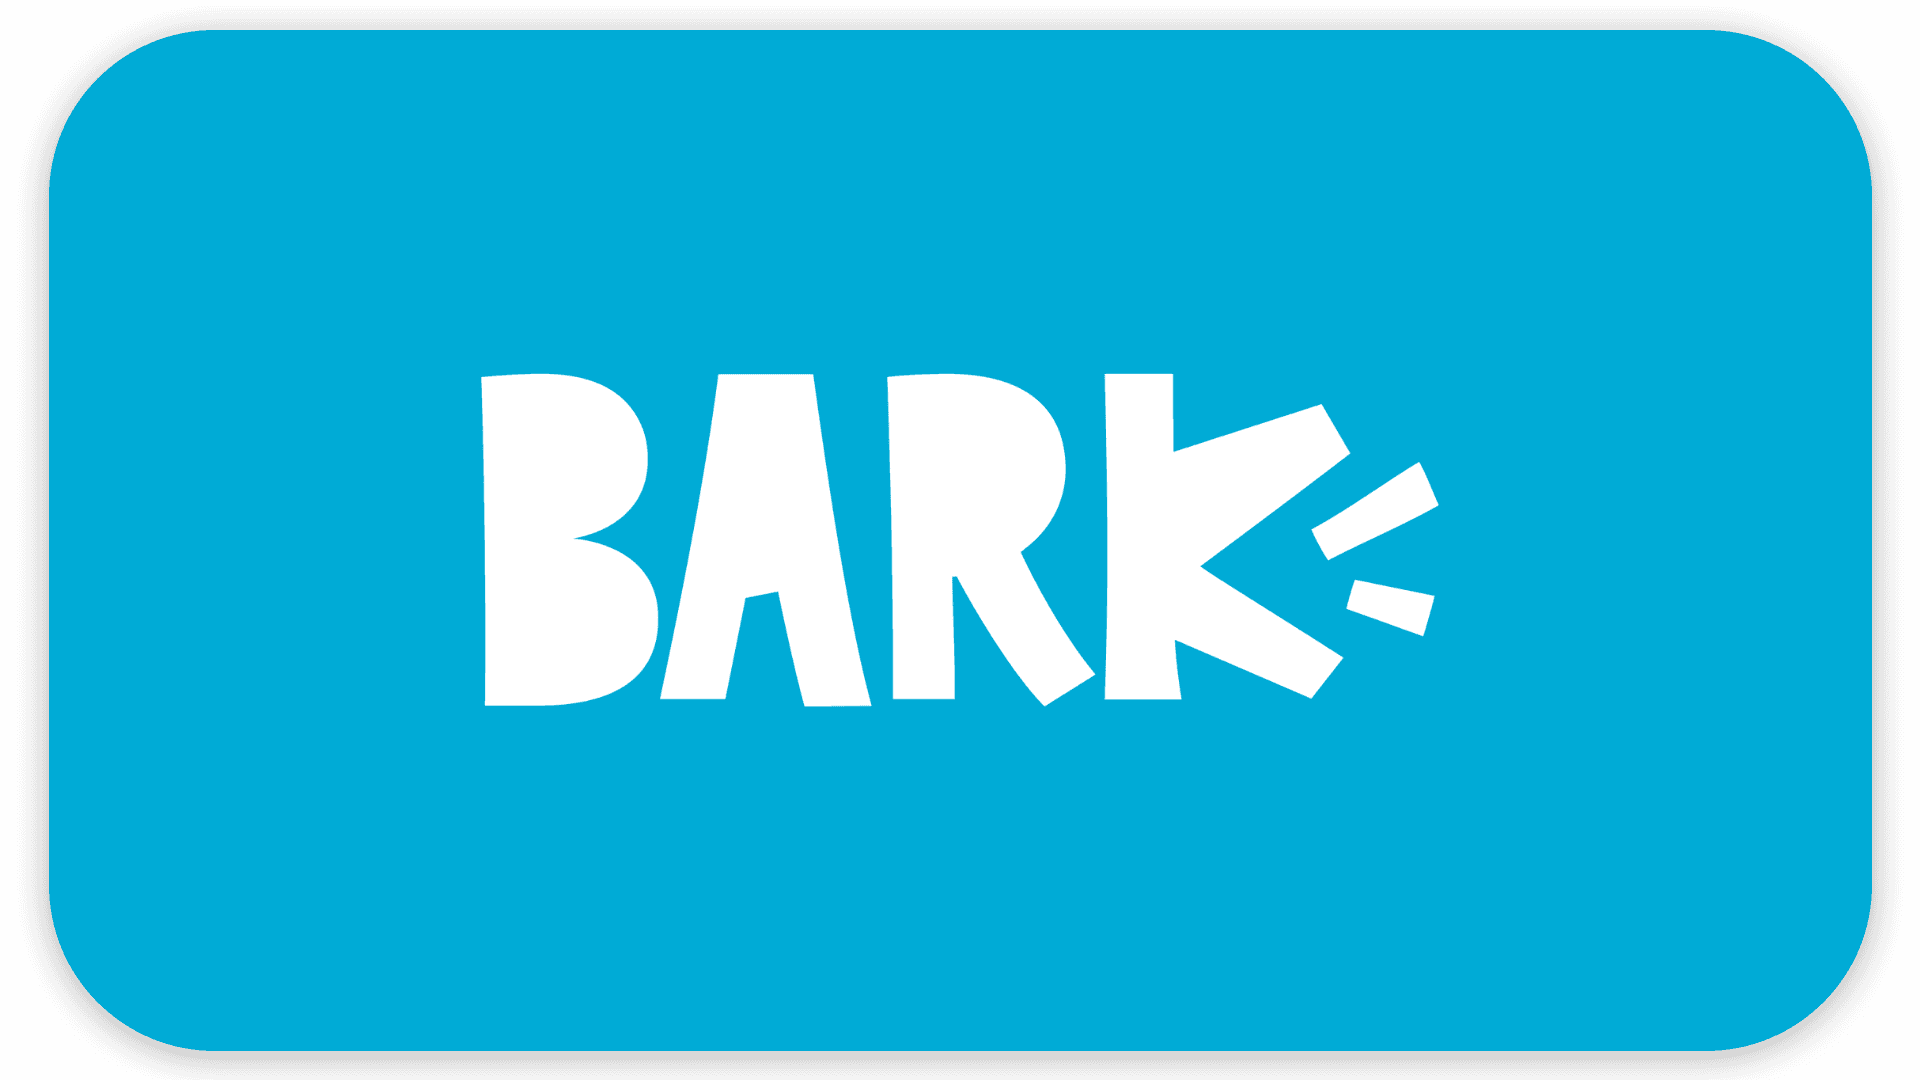 A blue rectangle with the white text "BARK!" has movement lines around the letter "K.